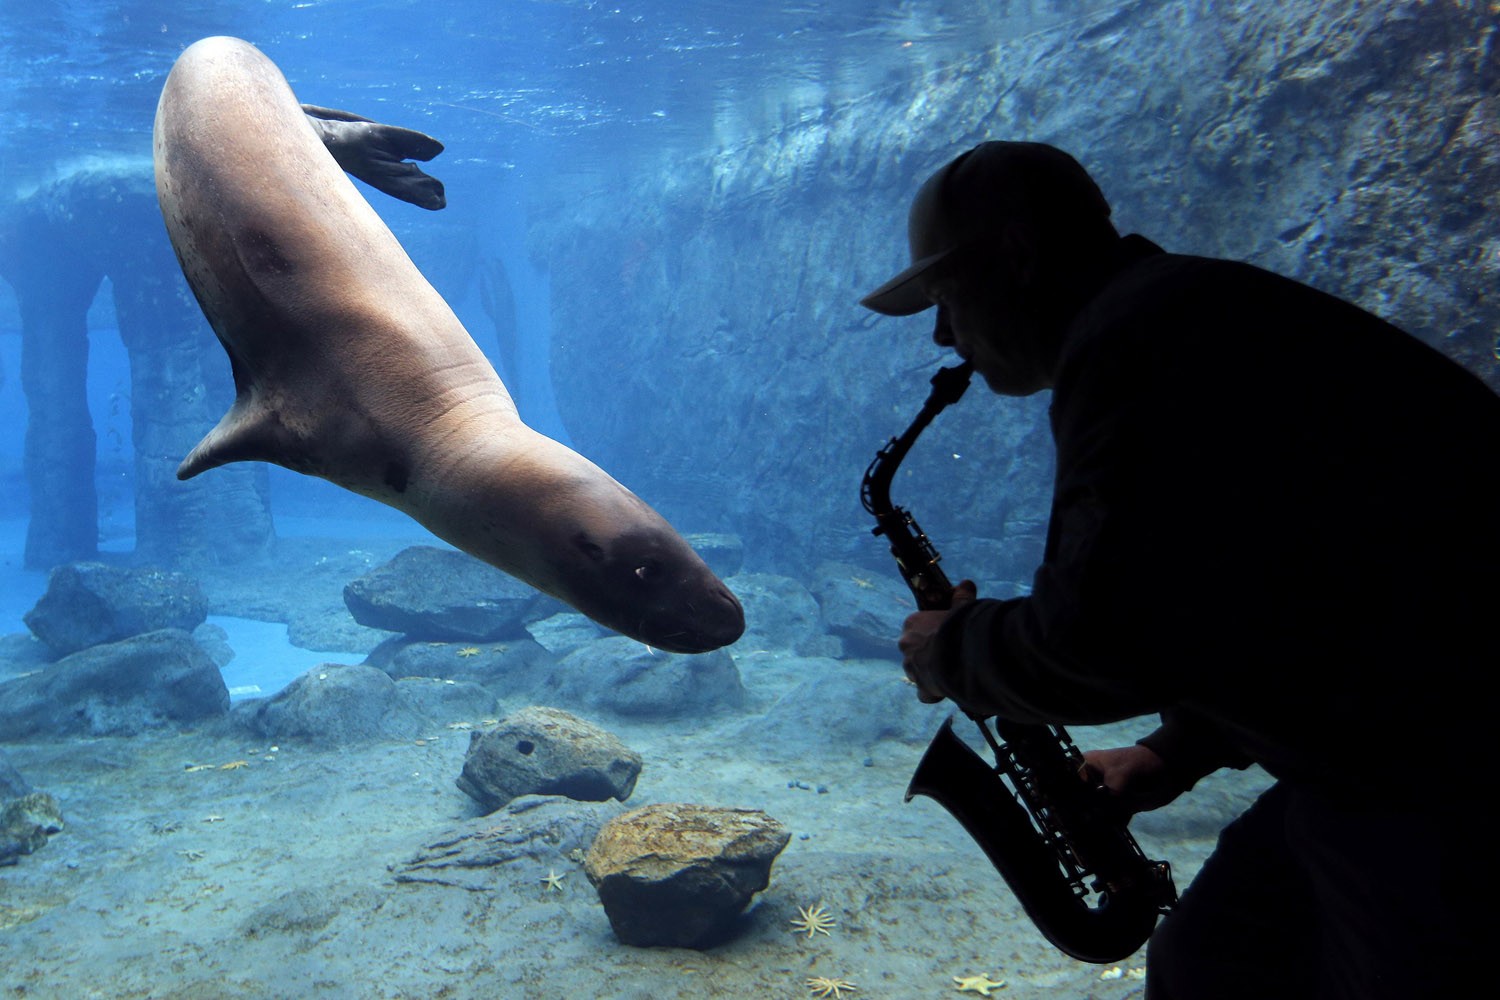 Steve Westnedge plays his saxophone for a Leopard Seal known as "Casey" as part of a study on the animal's reactions to different sounds at Sydney's Taronga Zoo